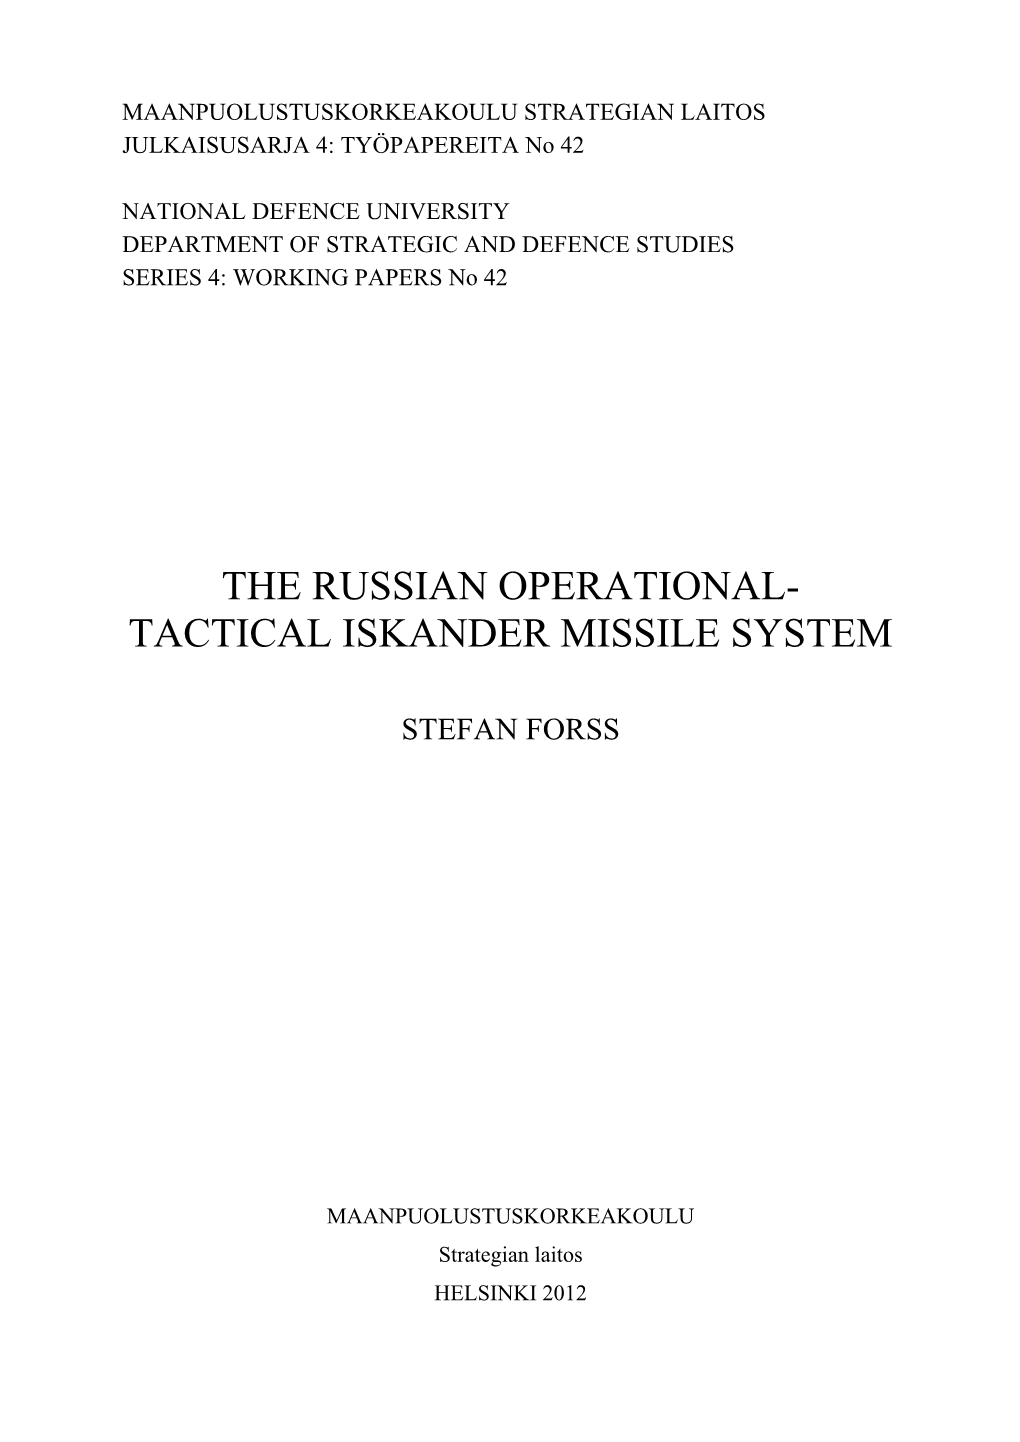 The Russian Operational-Tactical